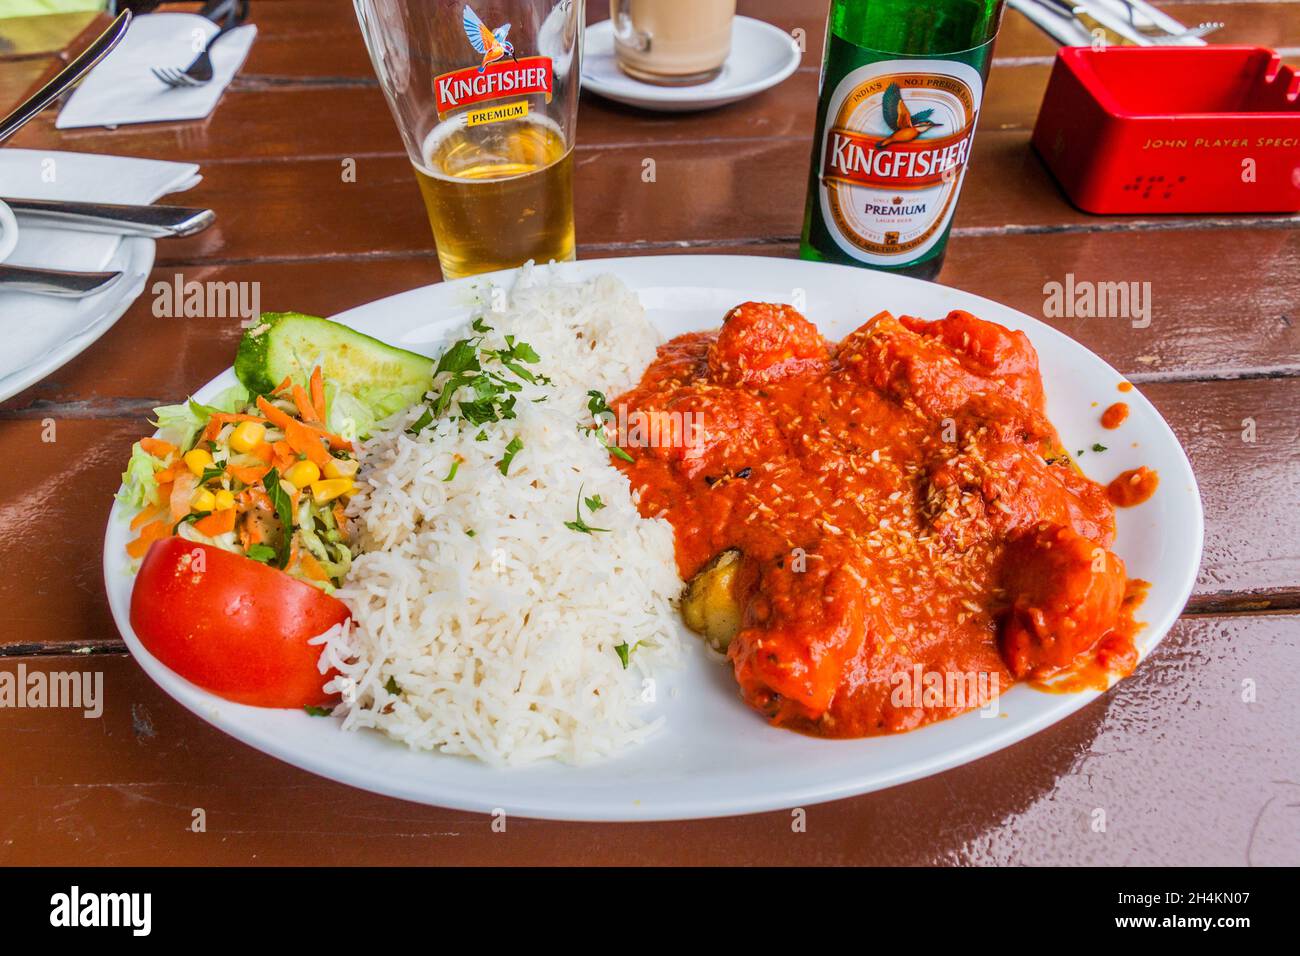 BERLIN, GERMANY - AUGUST 12, 2017: Chicken vindaloo meal with Kingfisher beer. Stock Photo